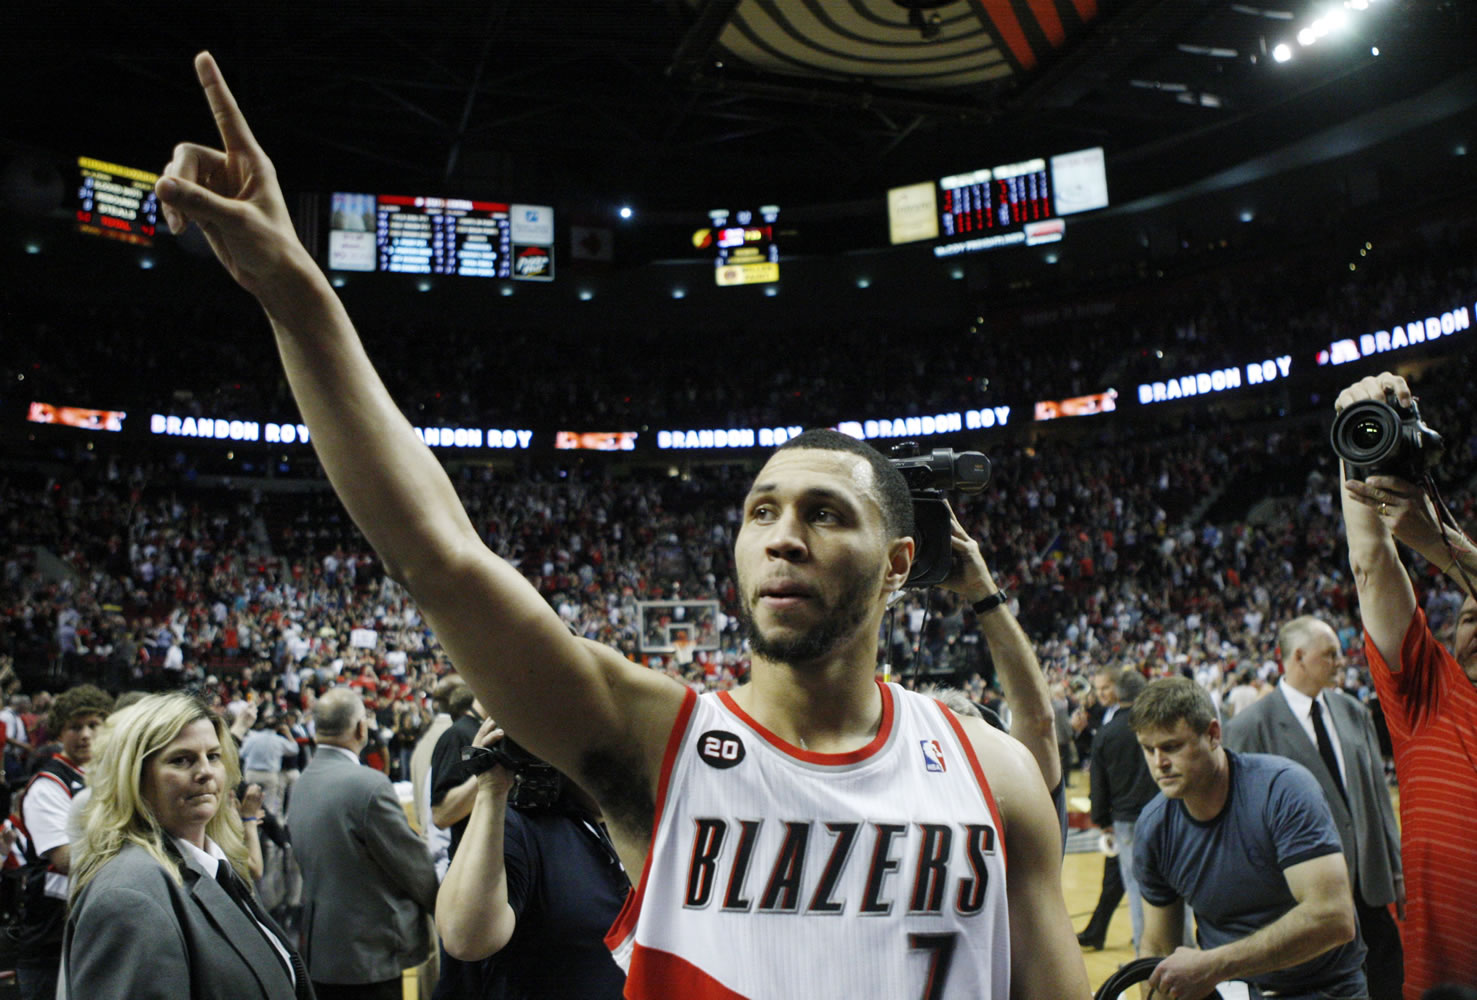 Brandon Roy gave the Portland Trail Blazers' fans so much to cheer about in his five seasons.